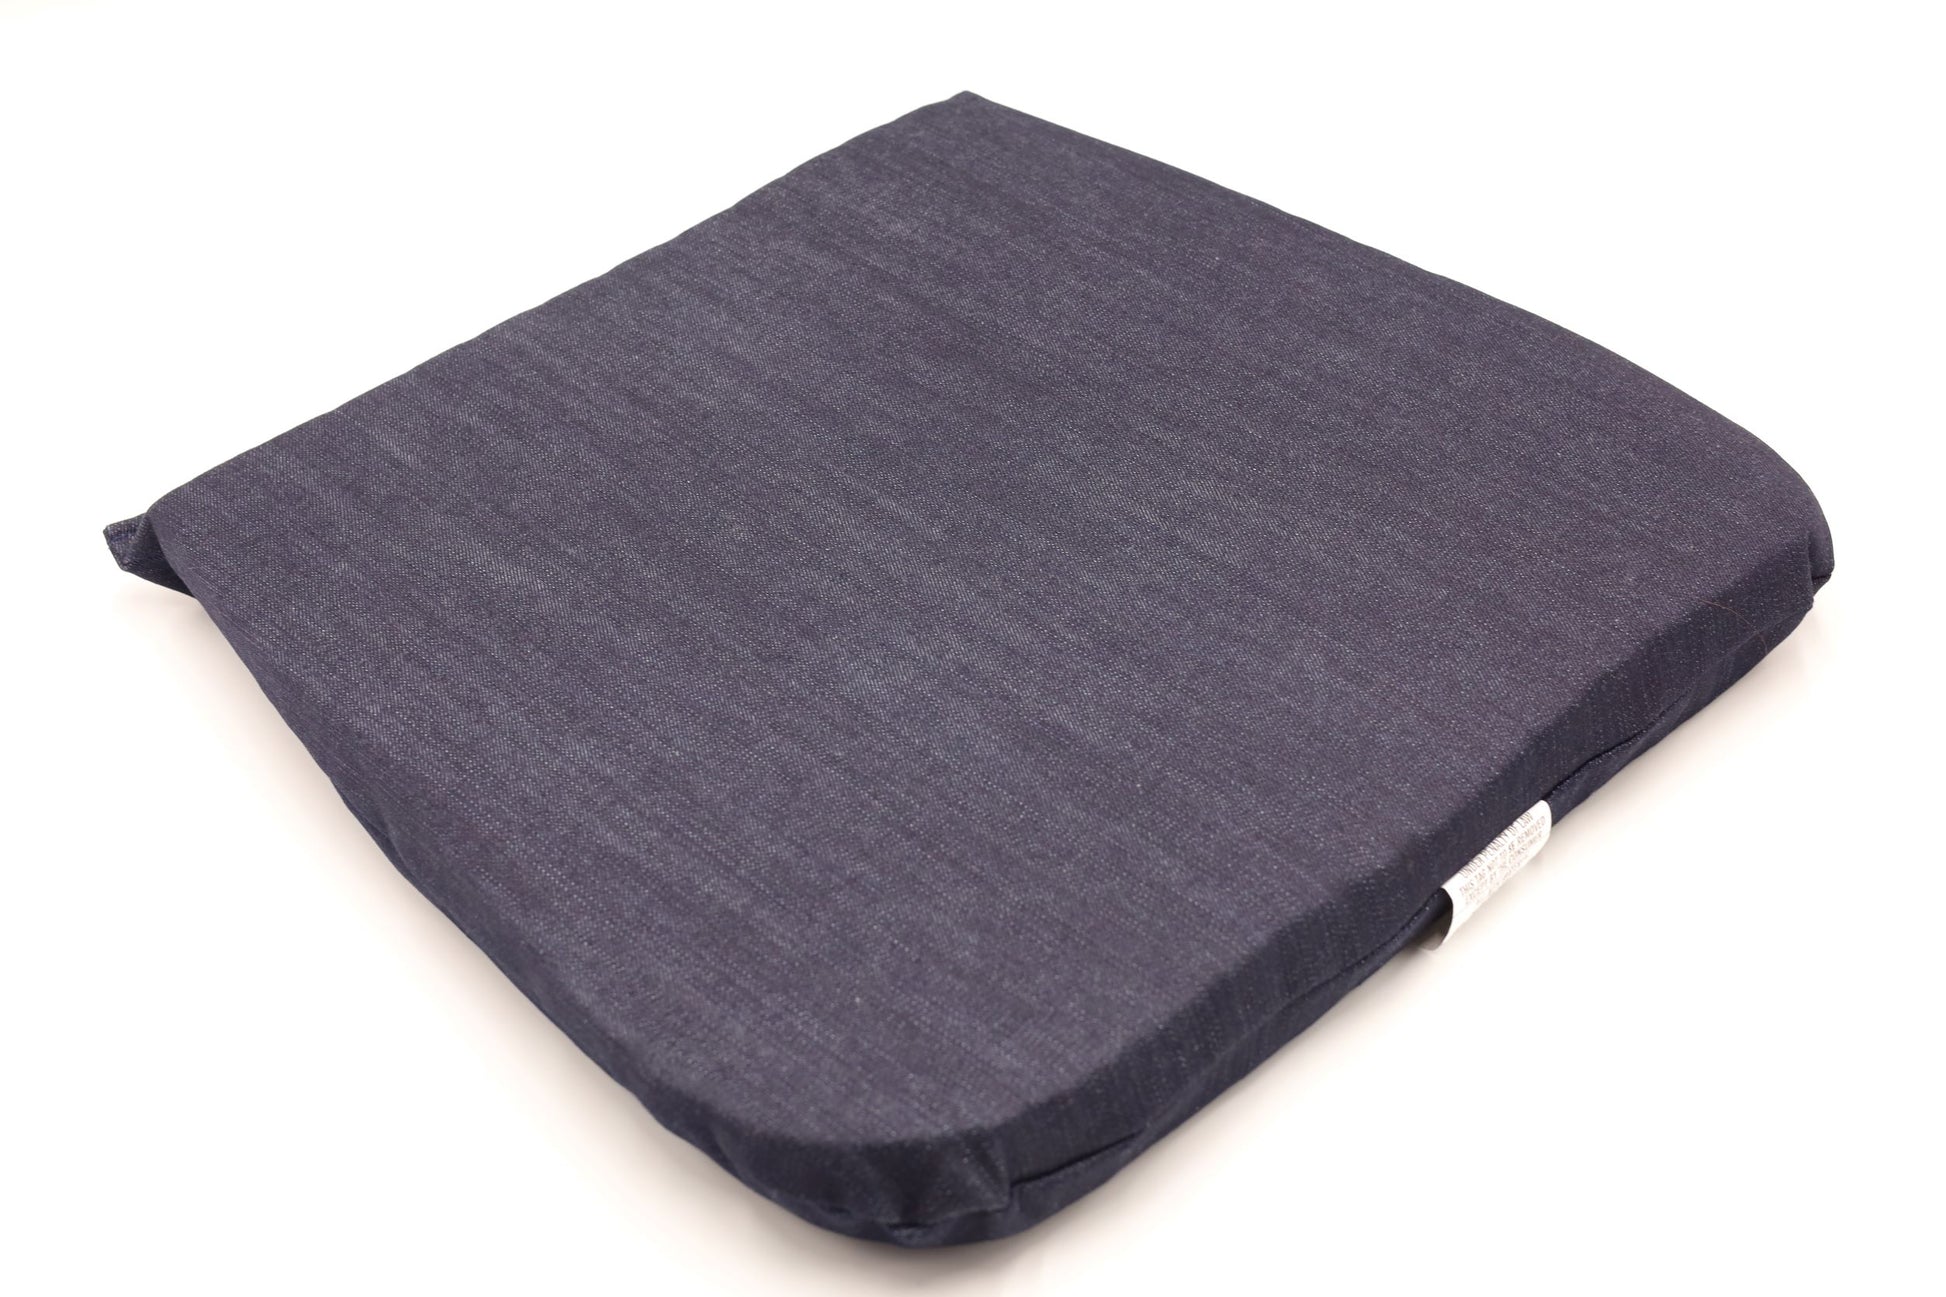 Organic Textiles Organic Seat Cushion with Organic Cotton Cover (2 Firm, 18x16)